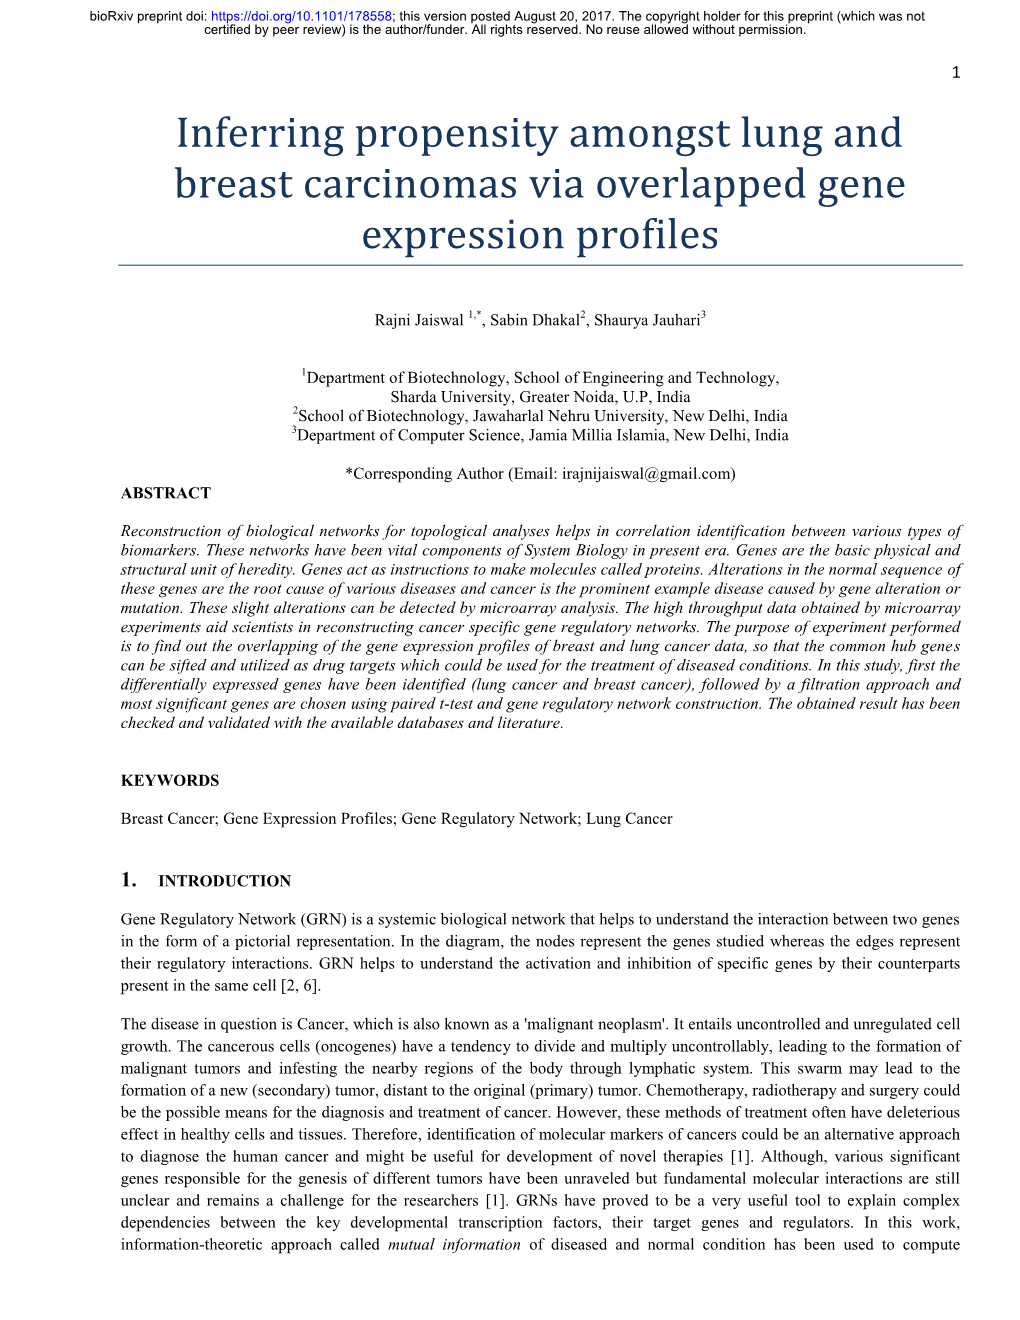 Inferring Propensity Amongst Lung and Breast Carcinomas Via Overlapped Gene Expression Profiles